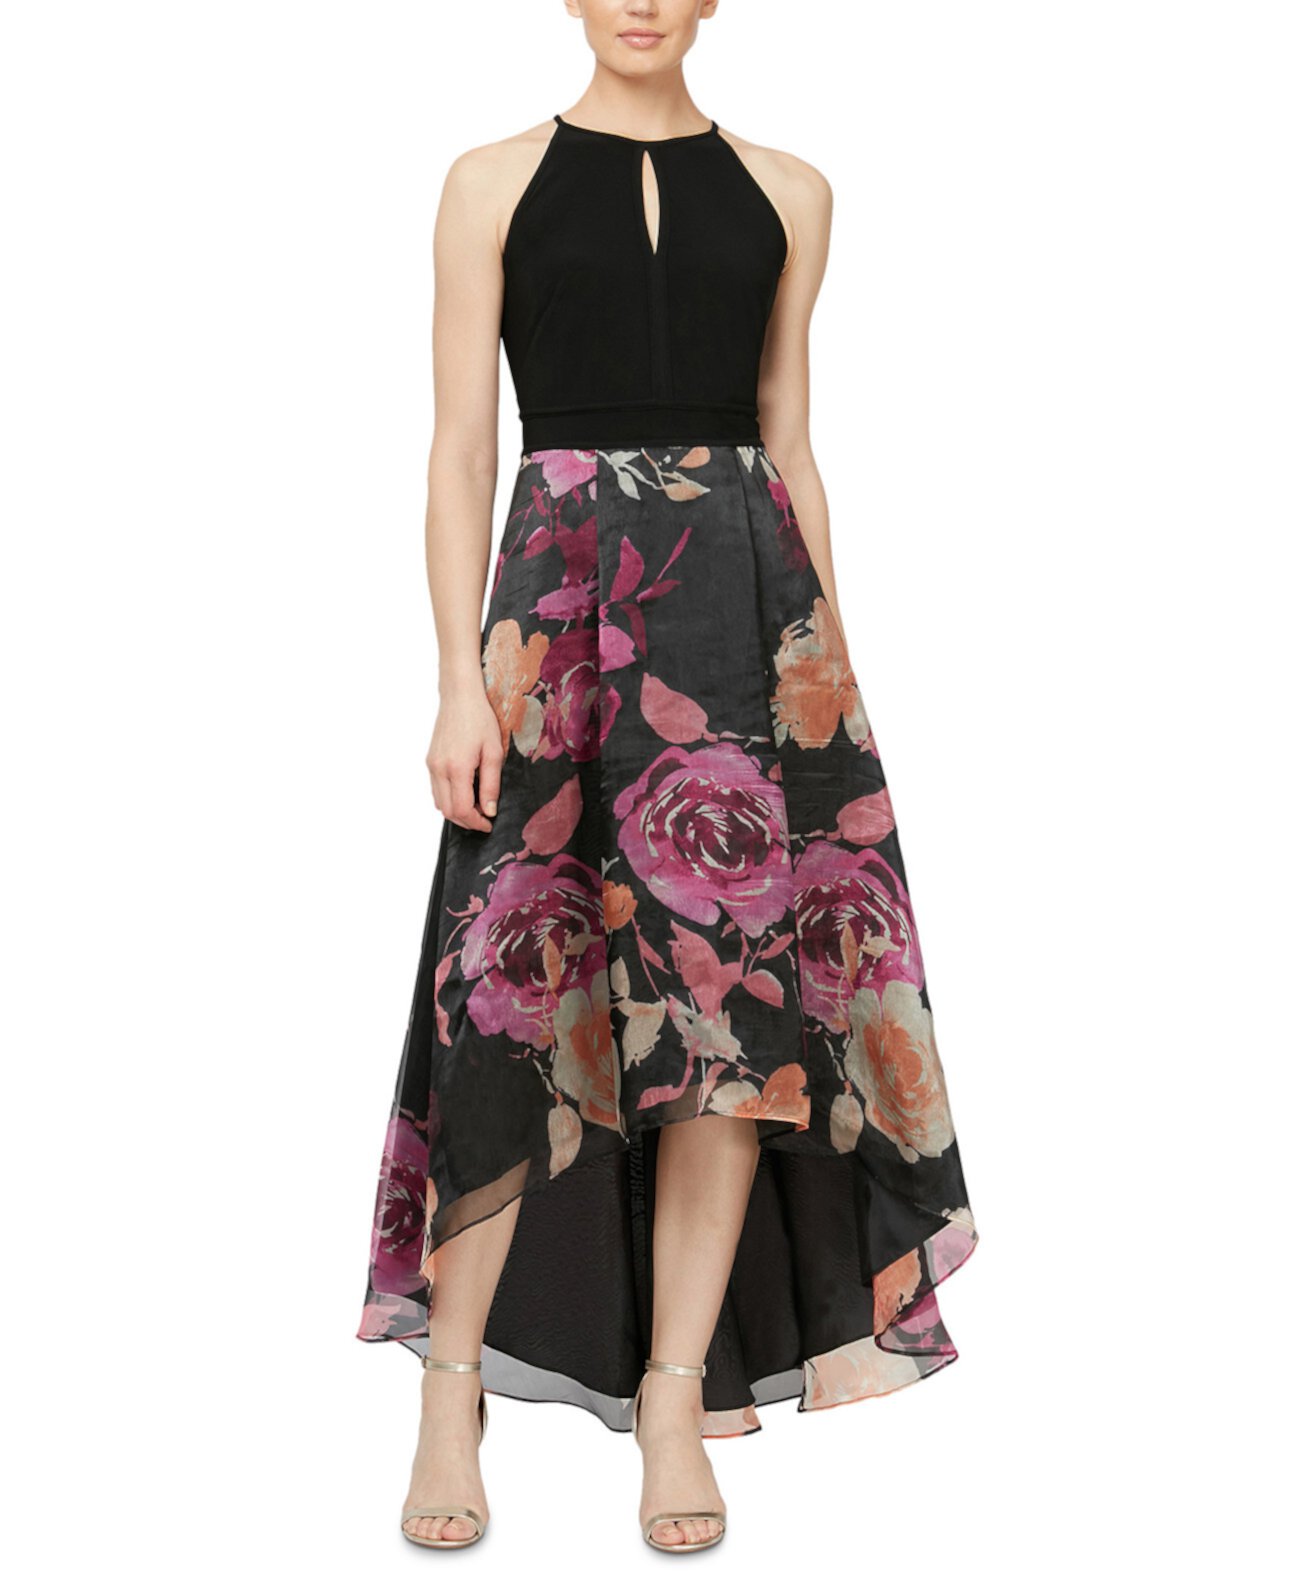 Floral-Print High-Low Fit & Flare Dress SL Fashions